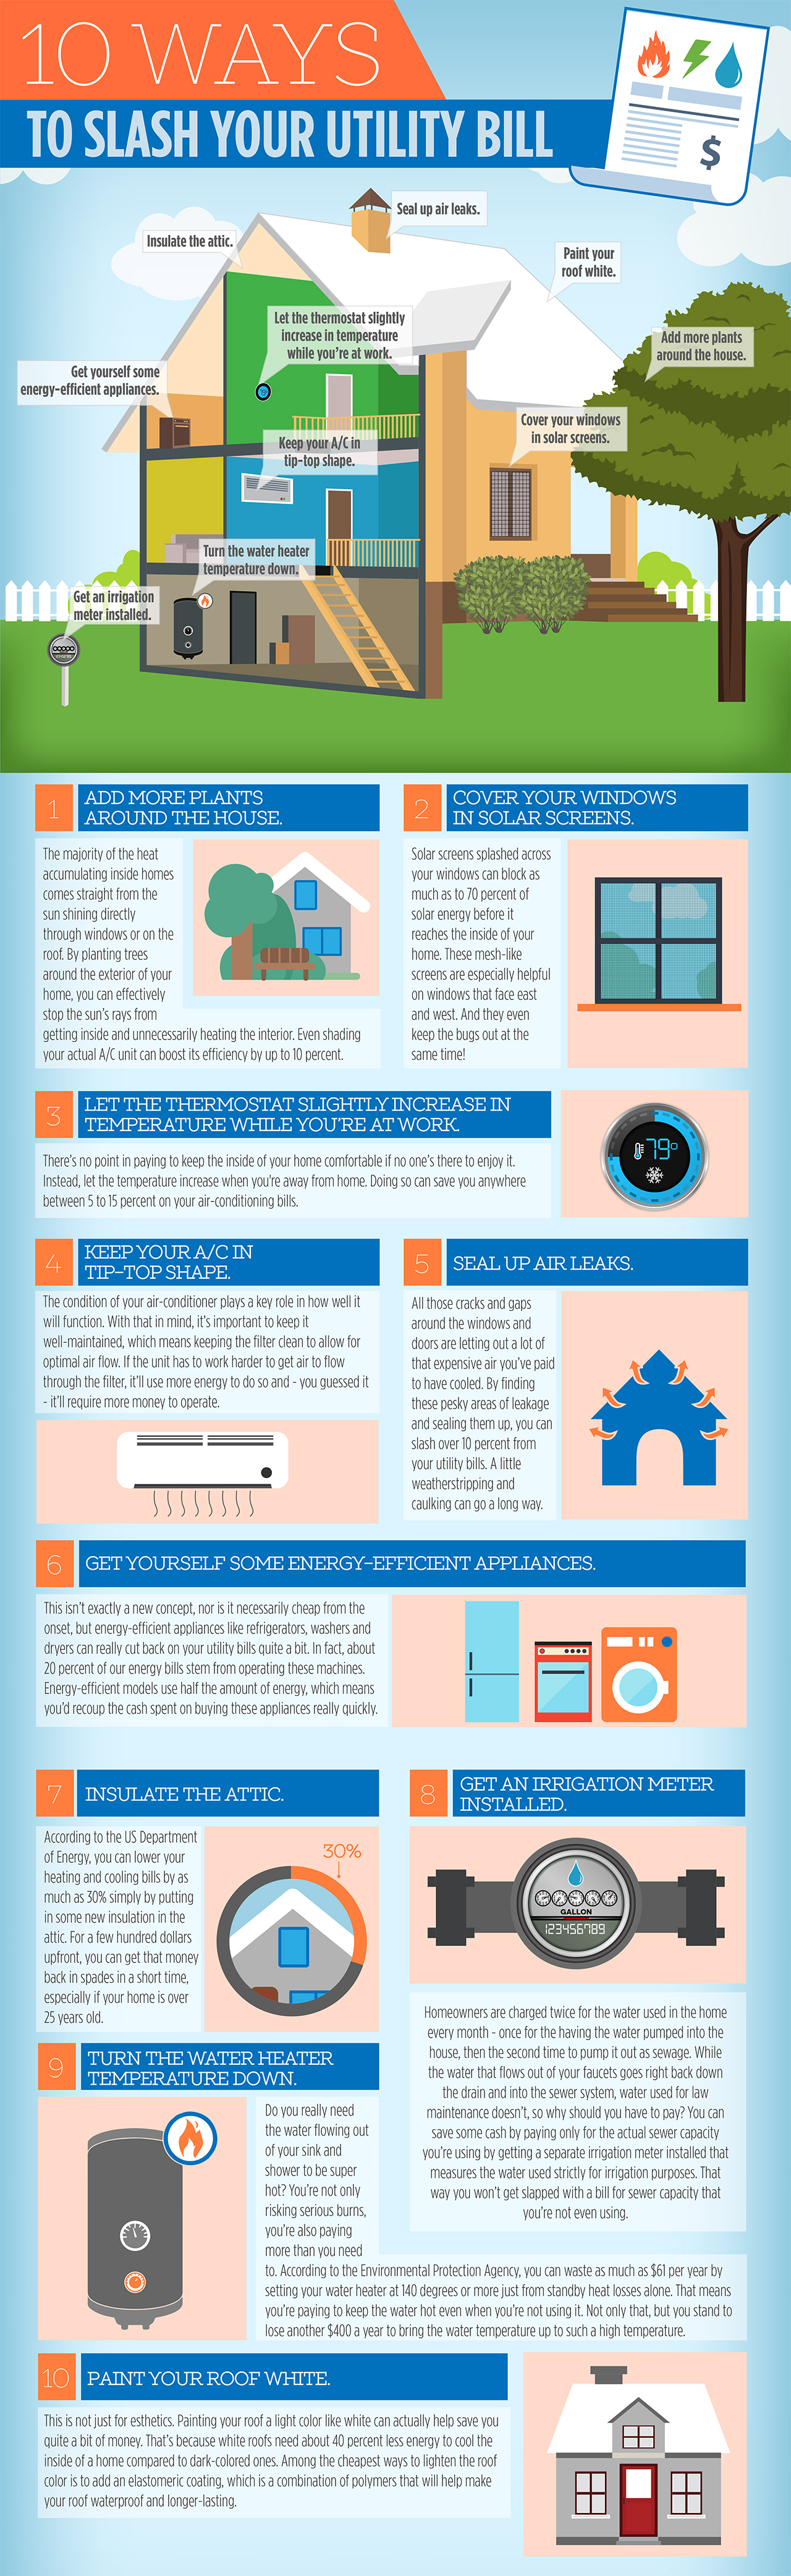 10-ways-to-slash-your-utility-bill-infographic